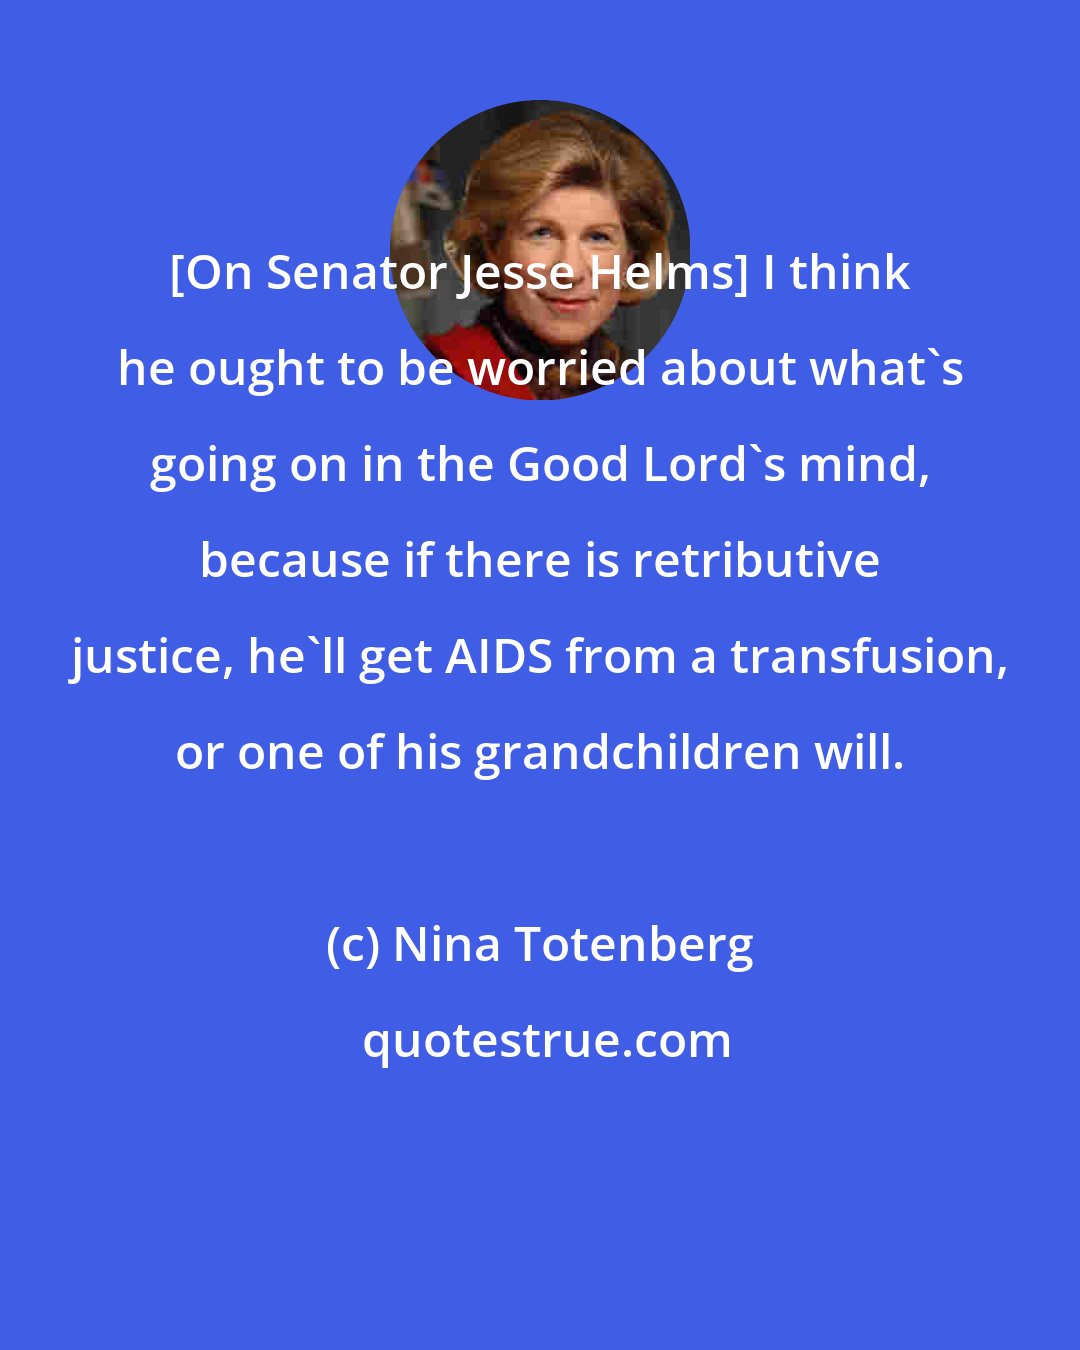 Nina Totenberg: [On Senator Jesse Helms] I think he ought to be worried about what's going on in the Good Lord's mind, because if there is retributive justice, he'll get AIDS from a transfusion, or one of his grandchildren will.